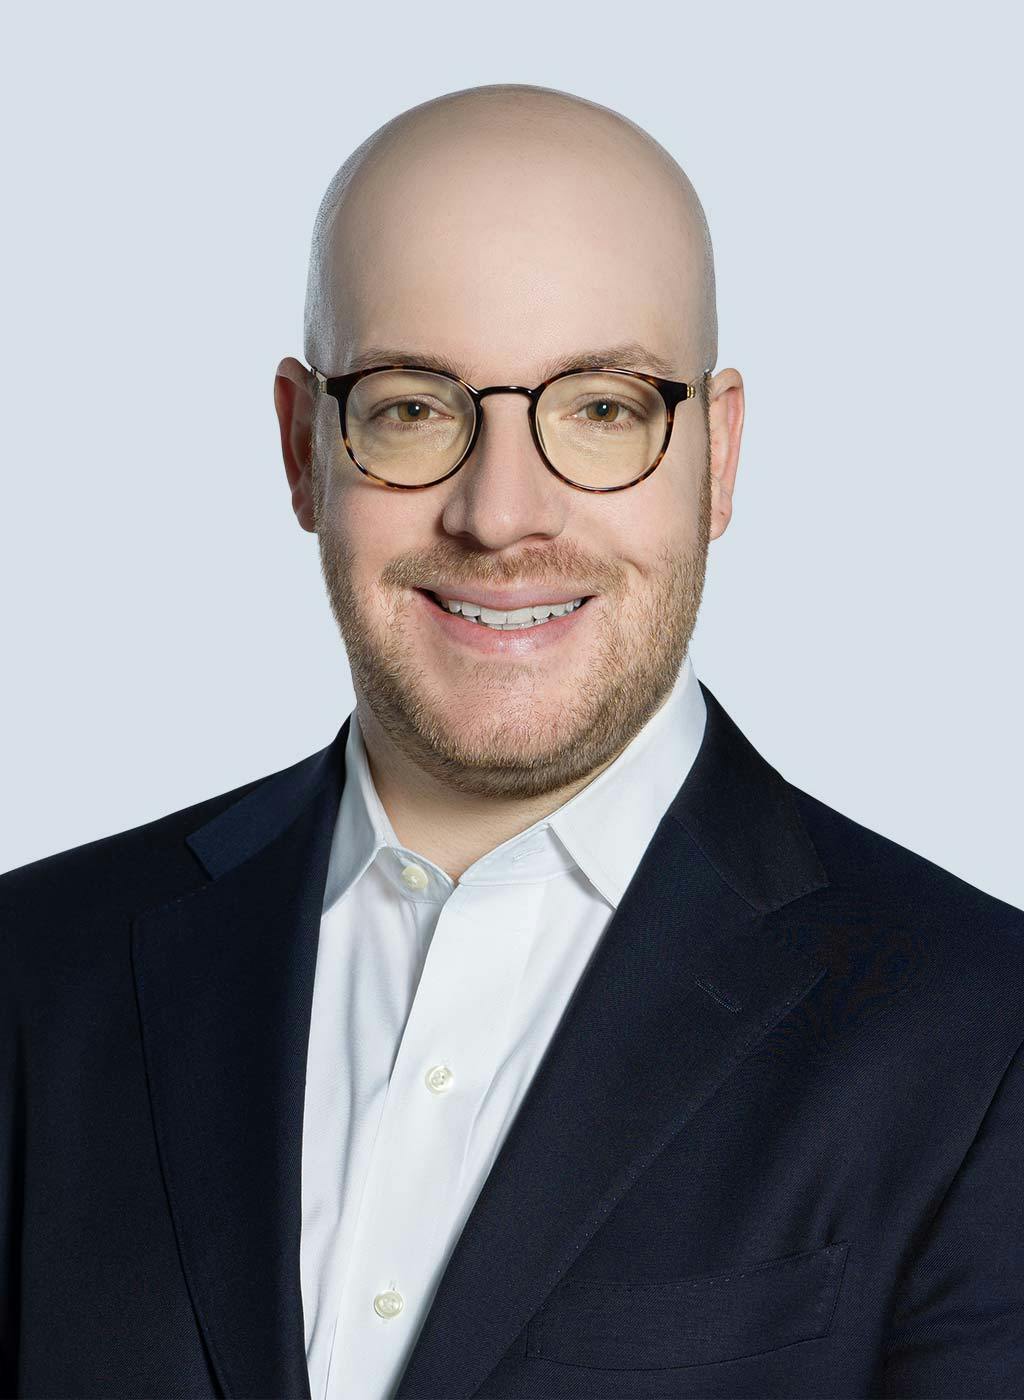 Andy Duberstein